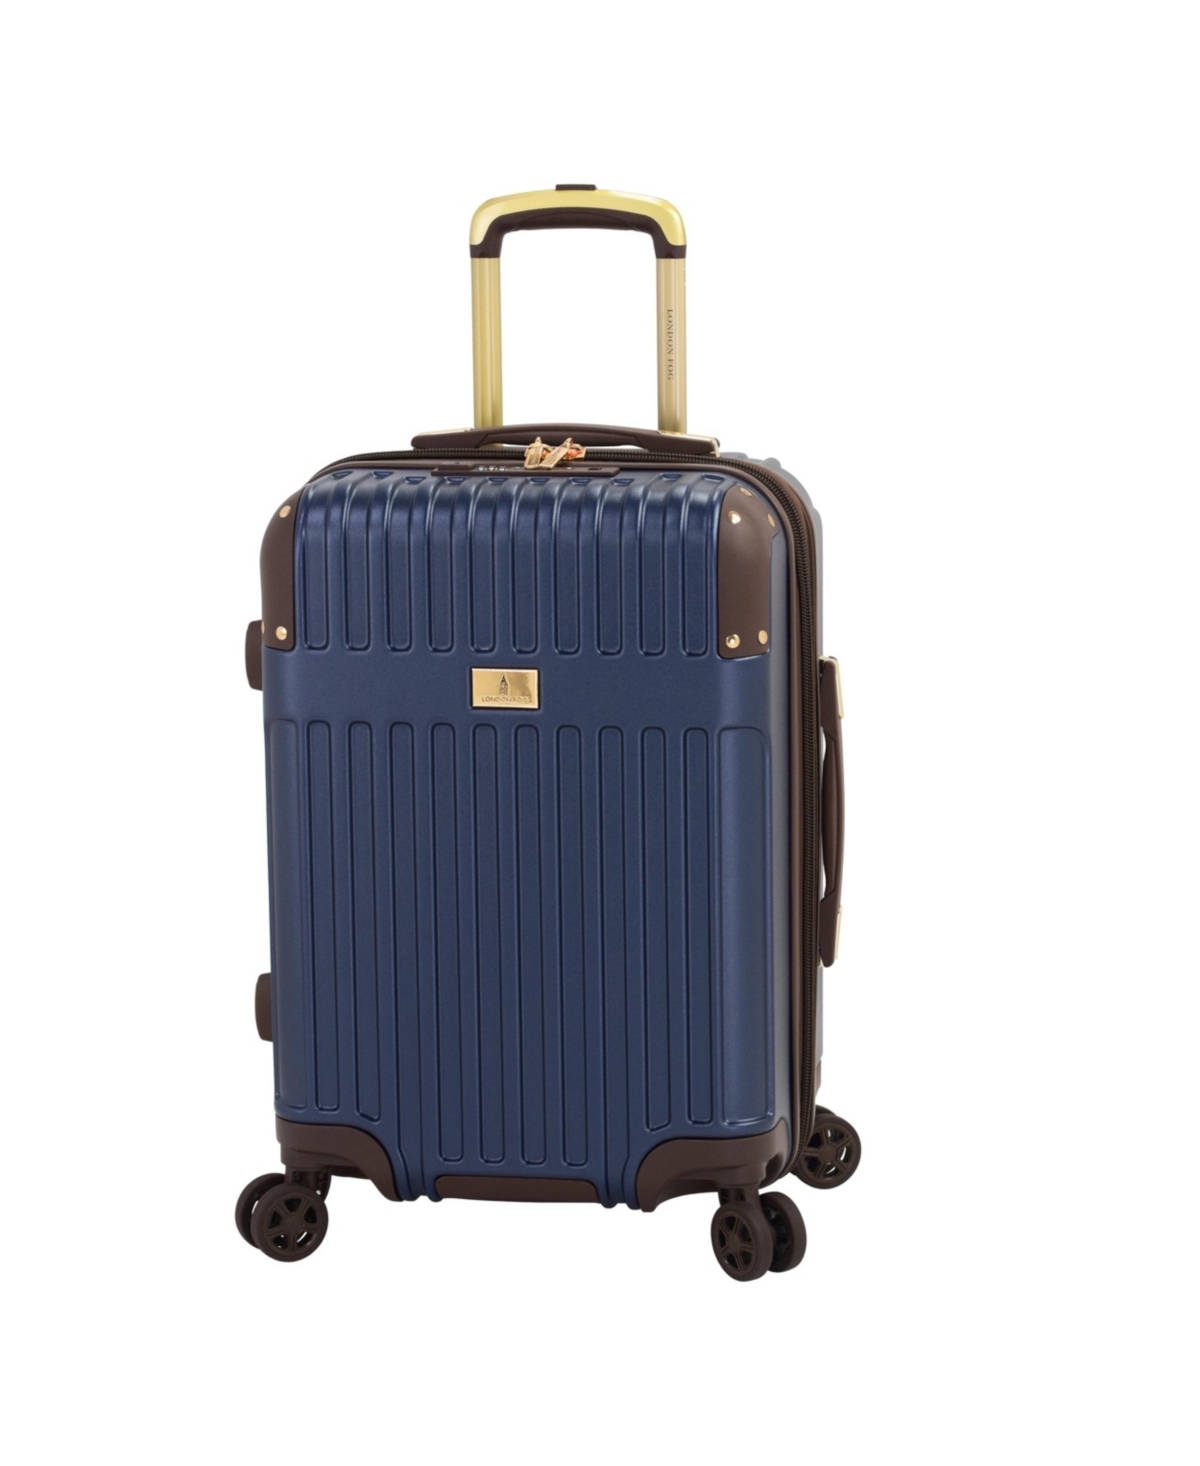 Brentwood Iii 20" Expandable Spinner Carry-On Hardside, Created for Macy's - Navy